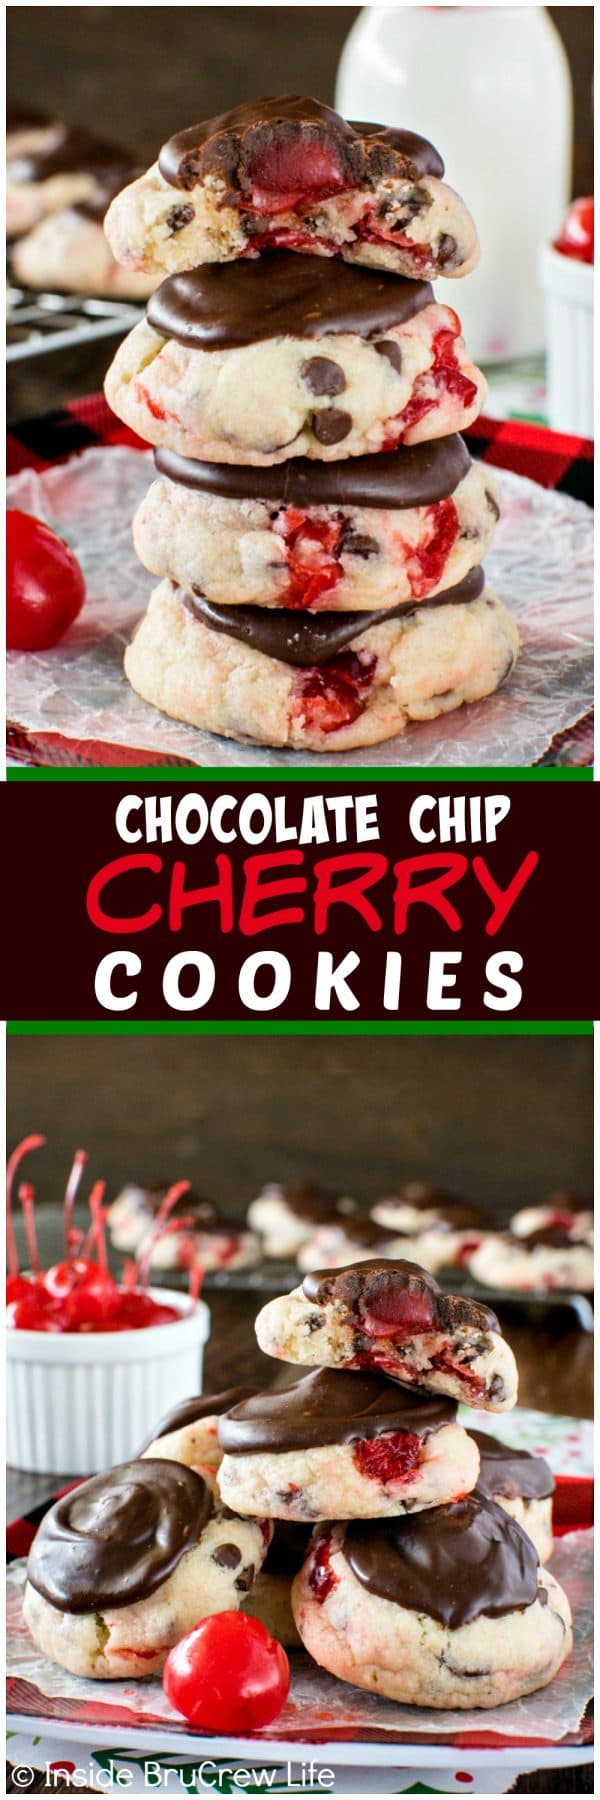 Chocolate Chip Cherry Cookies - these soft cookies are packed with chocolate and cherry goodness. This treat is the best recipe for holiday cookie trays!